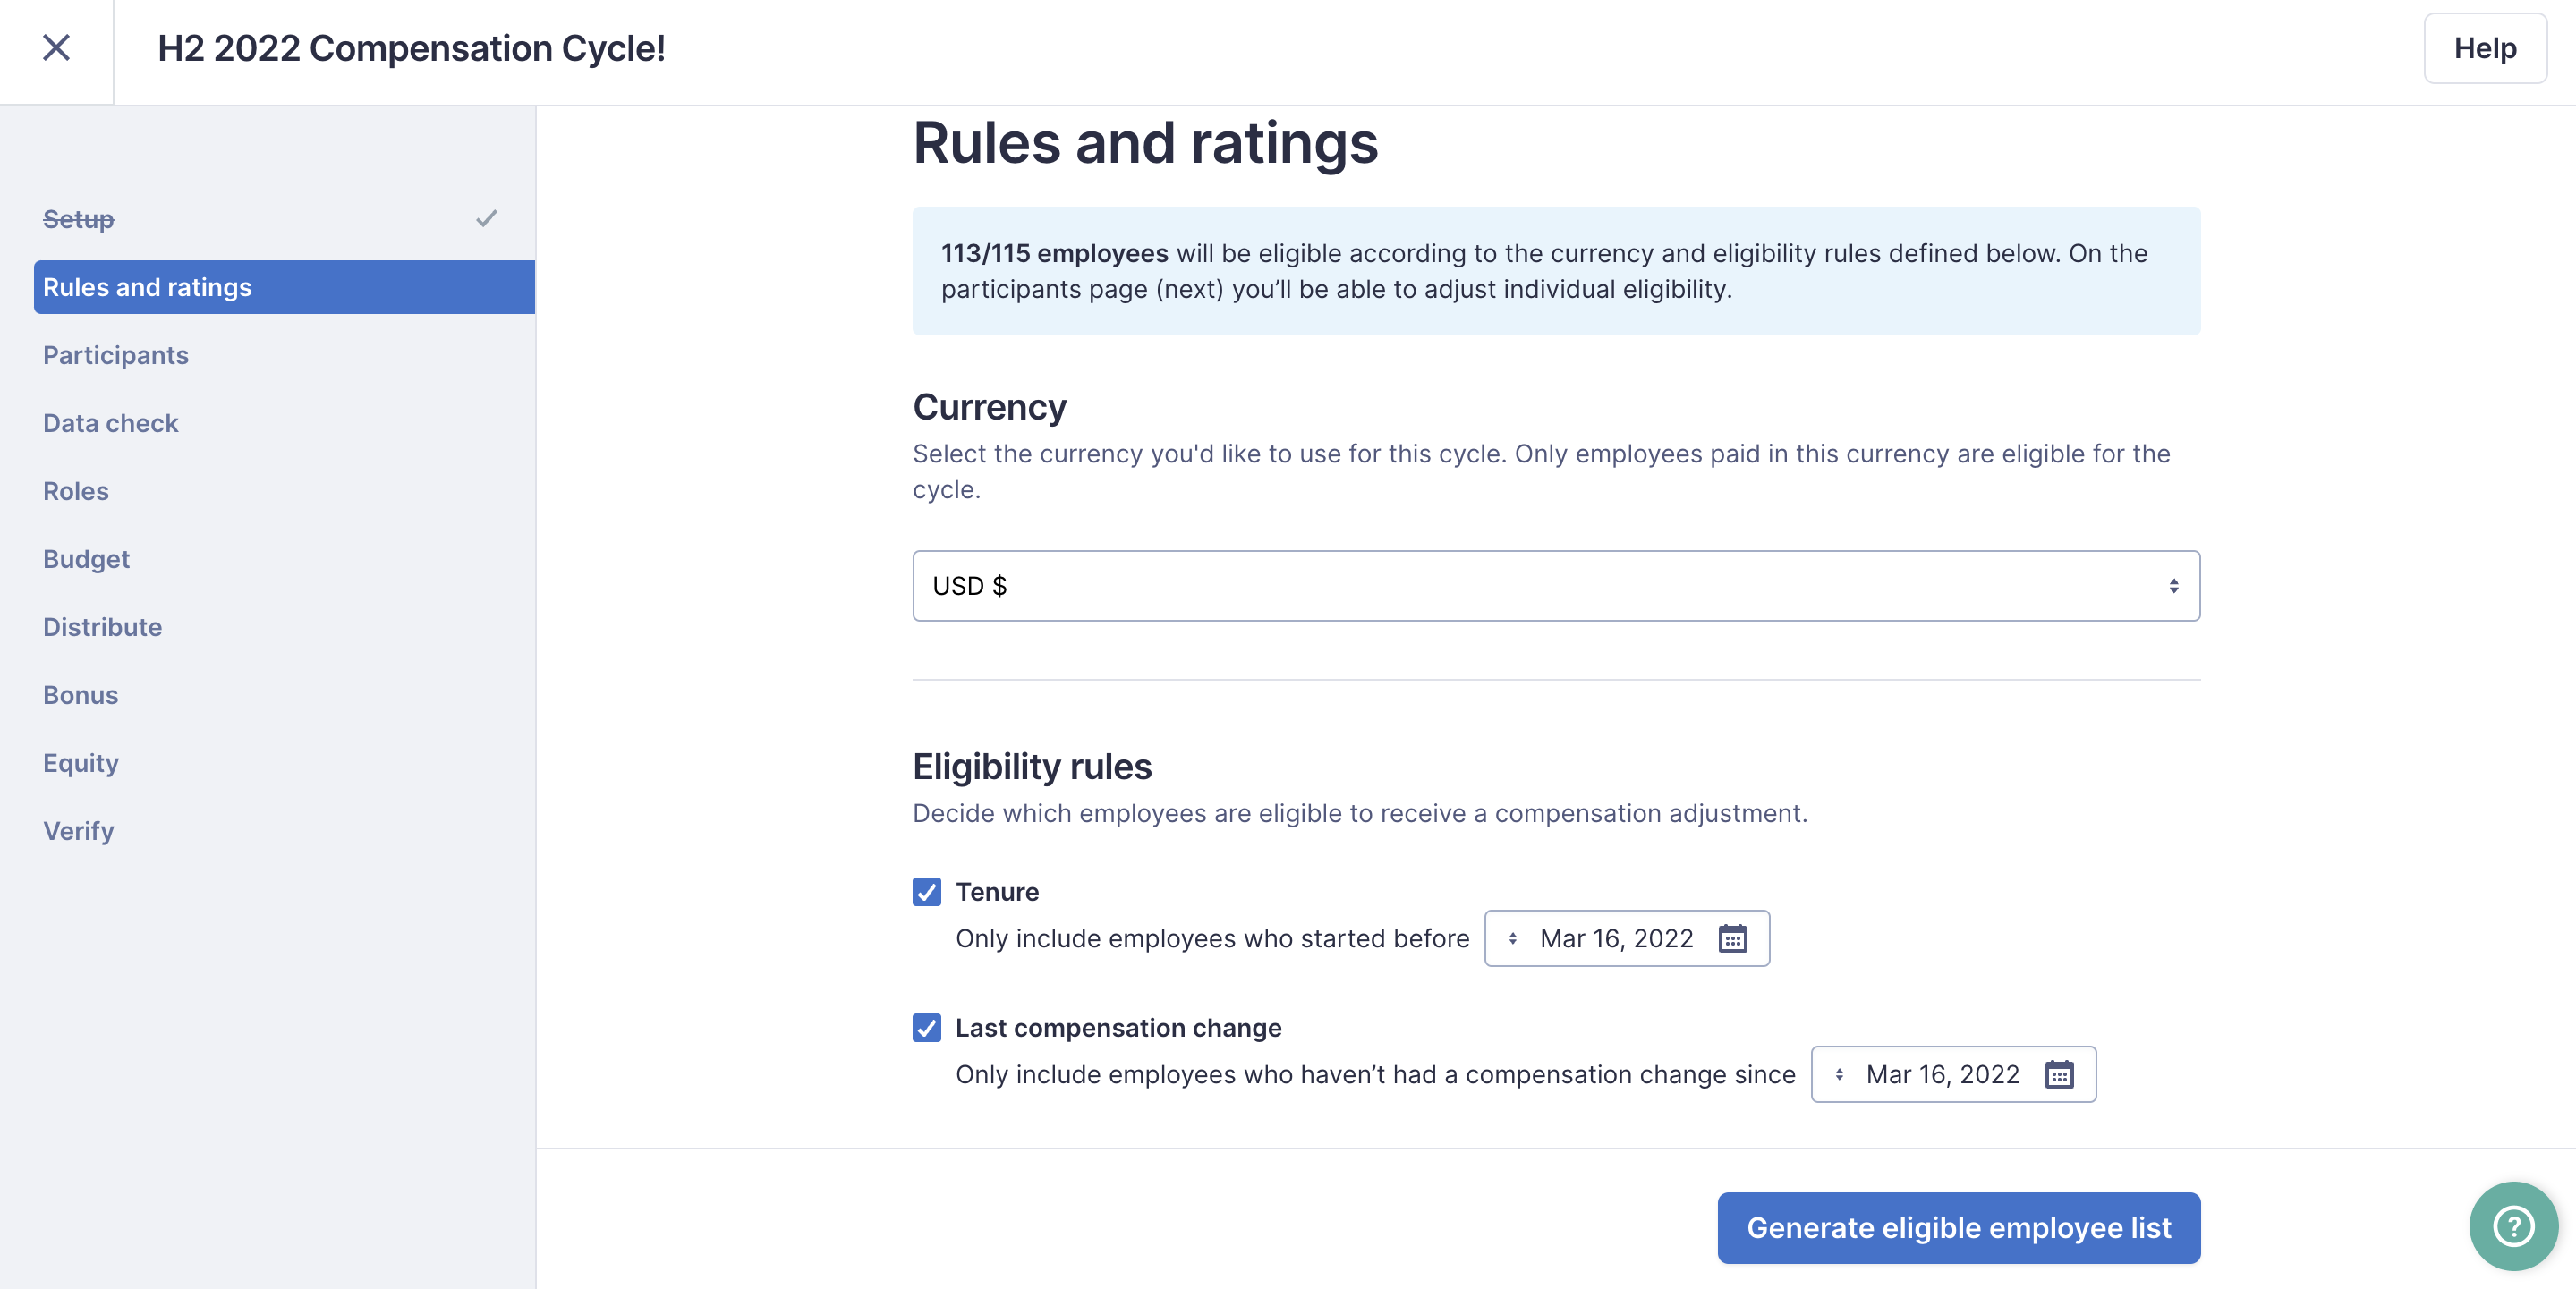 Image of Compensation Cycle Rules and Ratings page